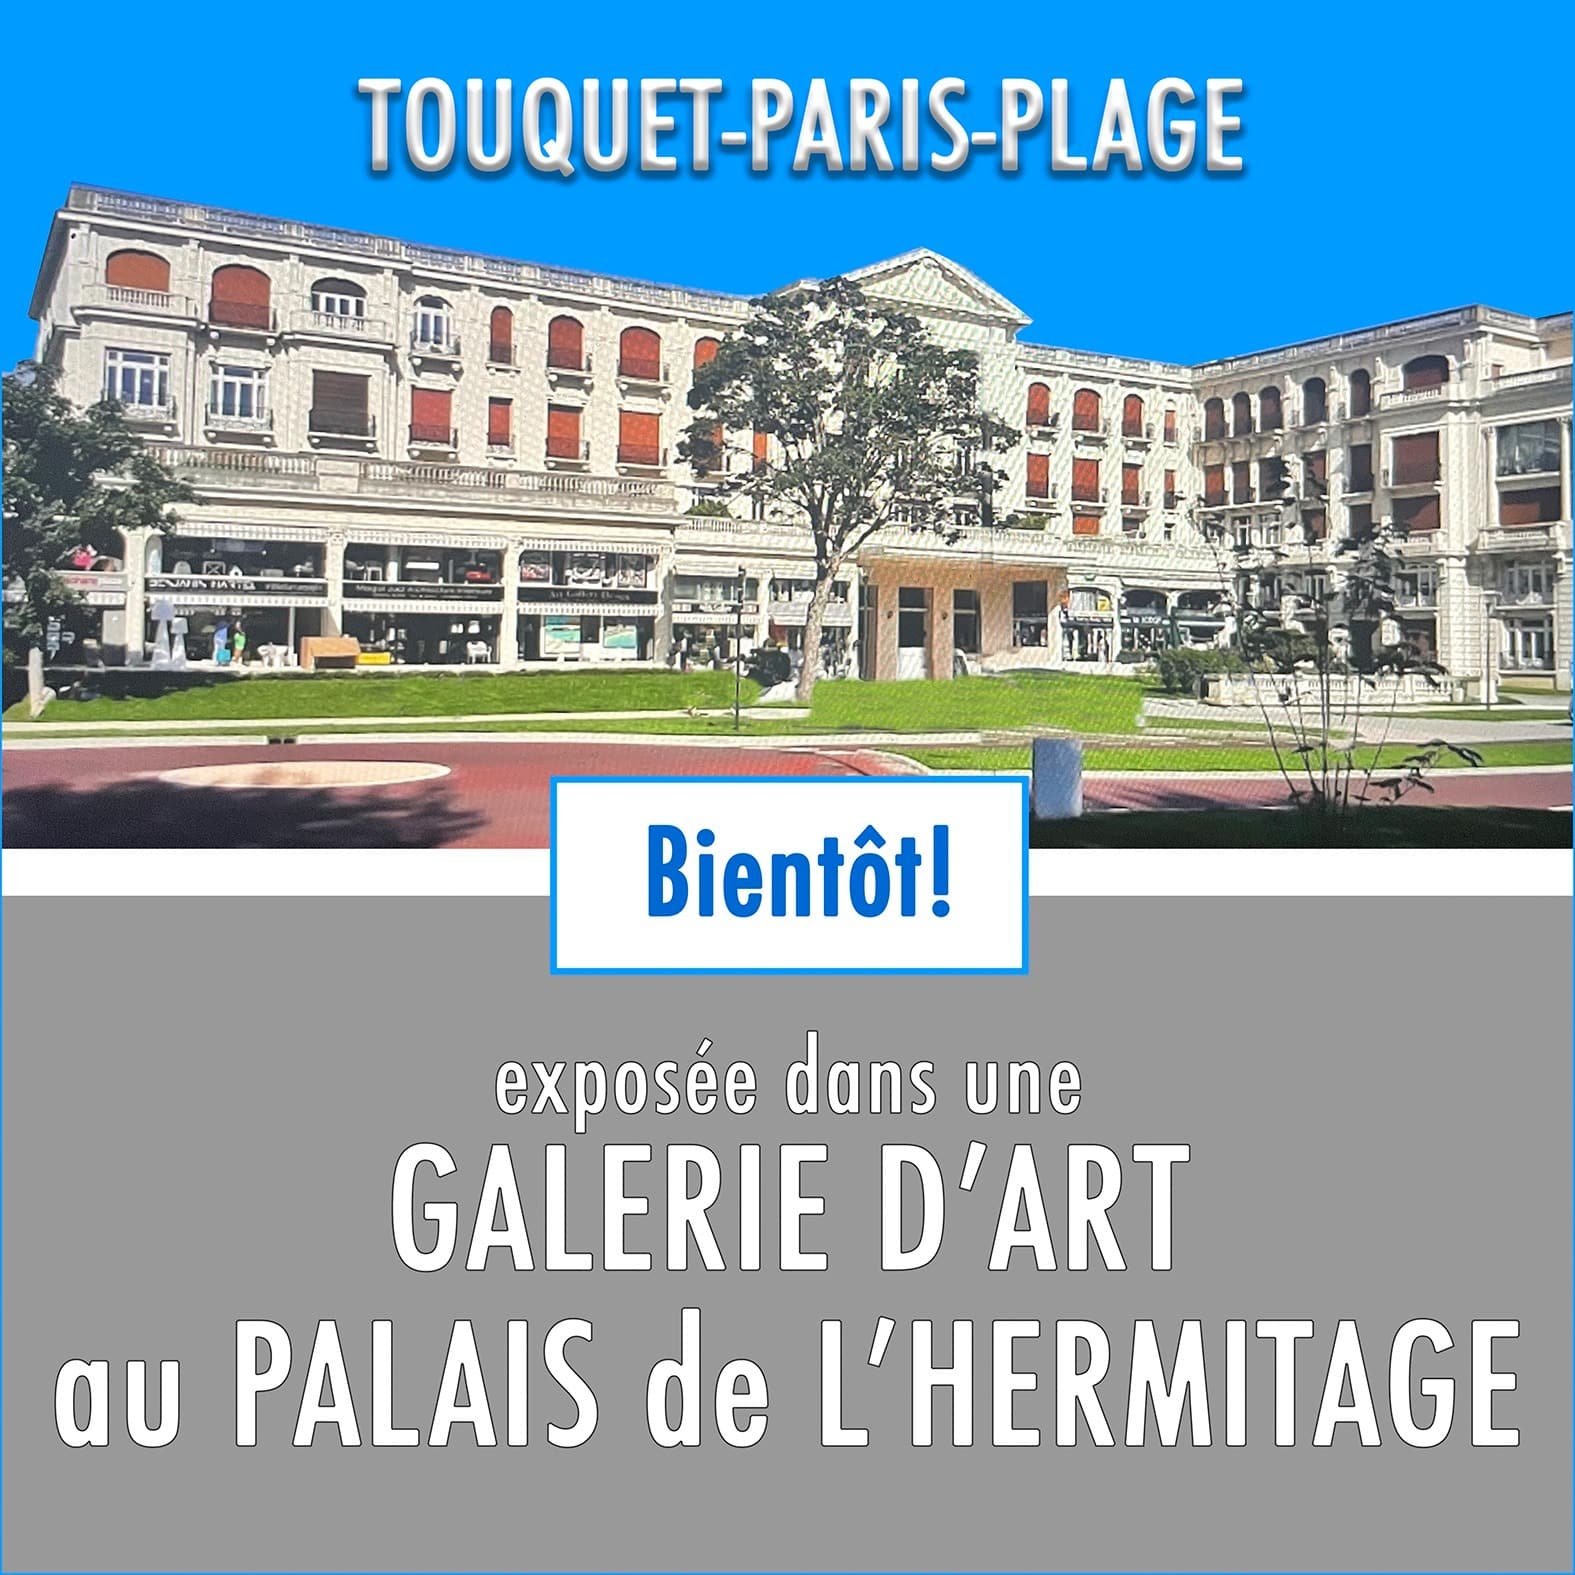 You are currently viewing Touquet-Paris-Plage